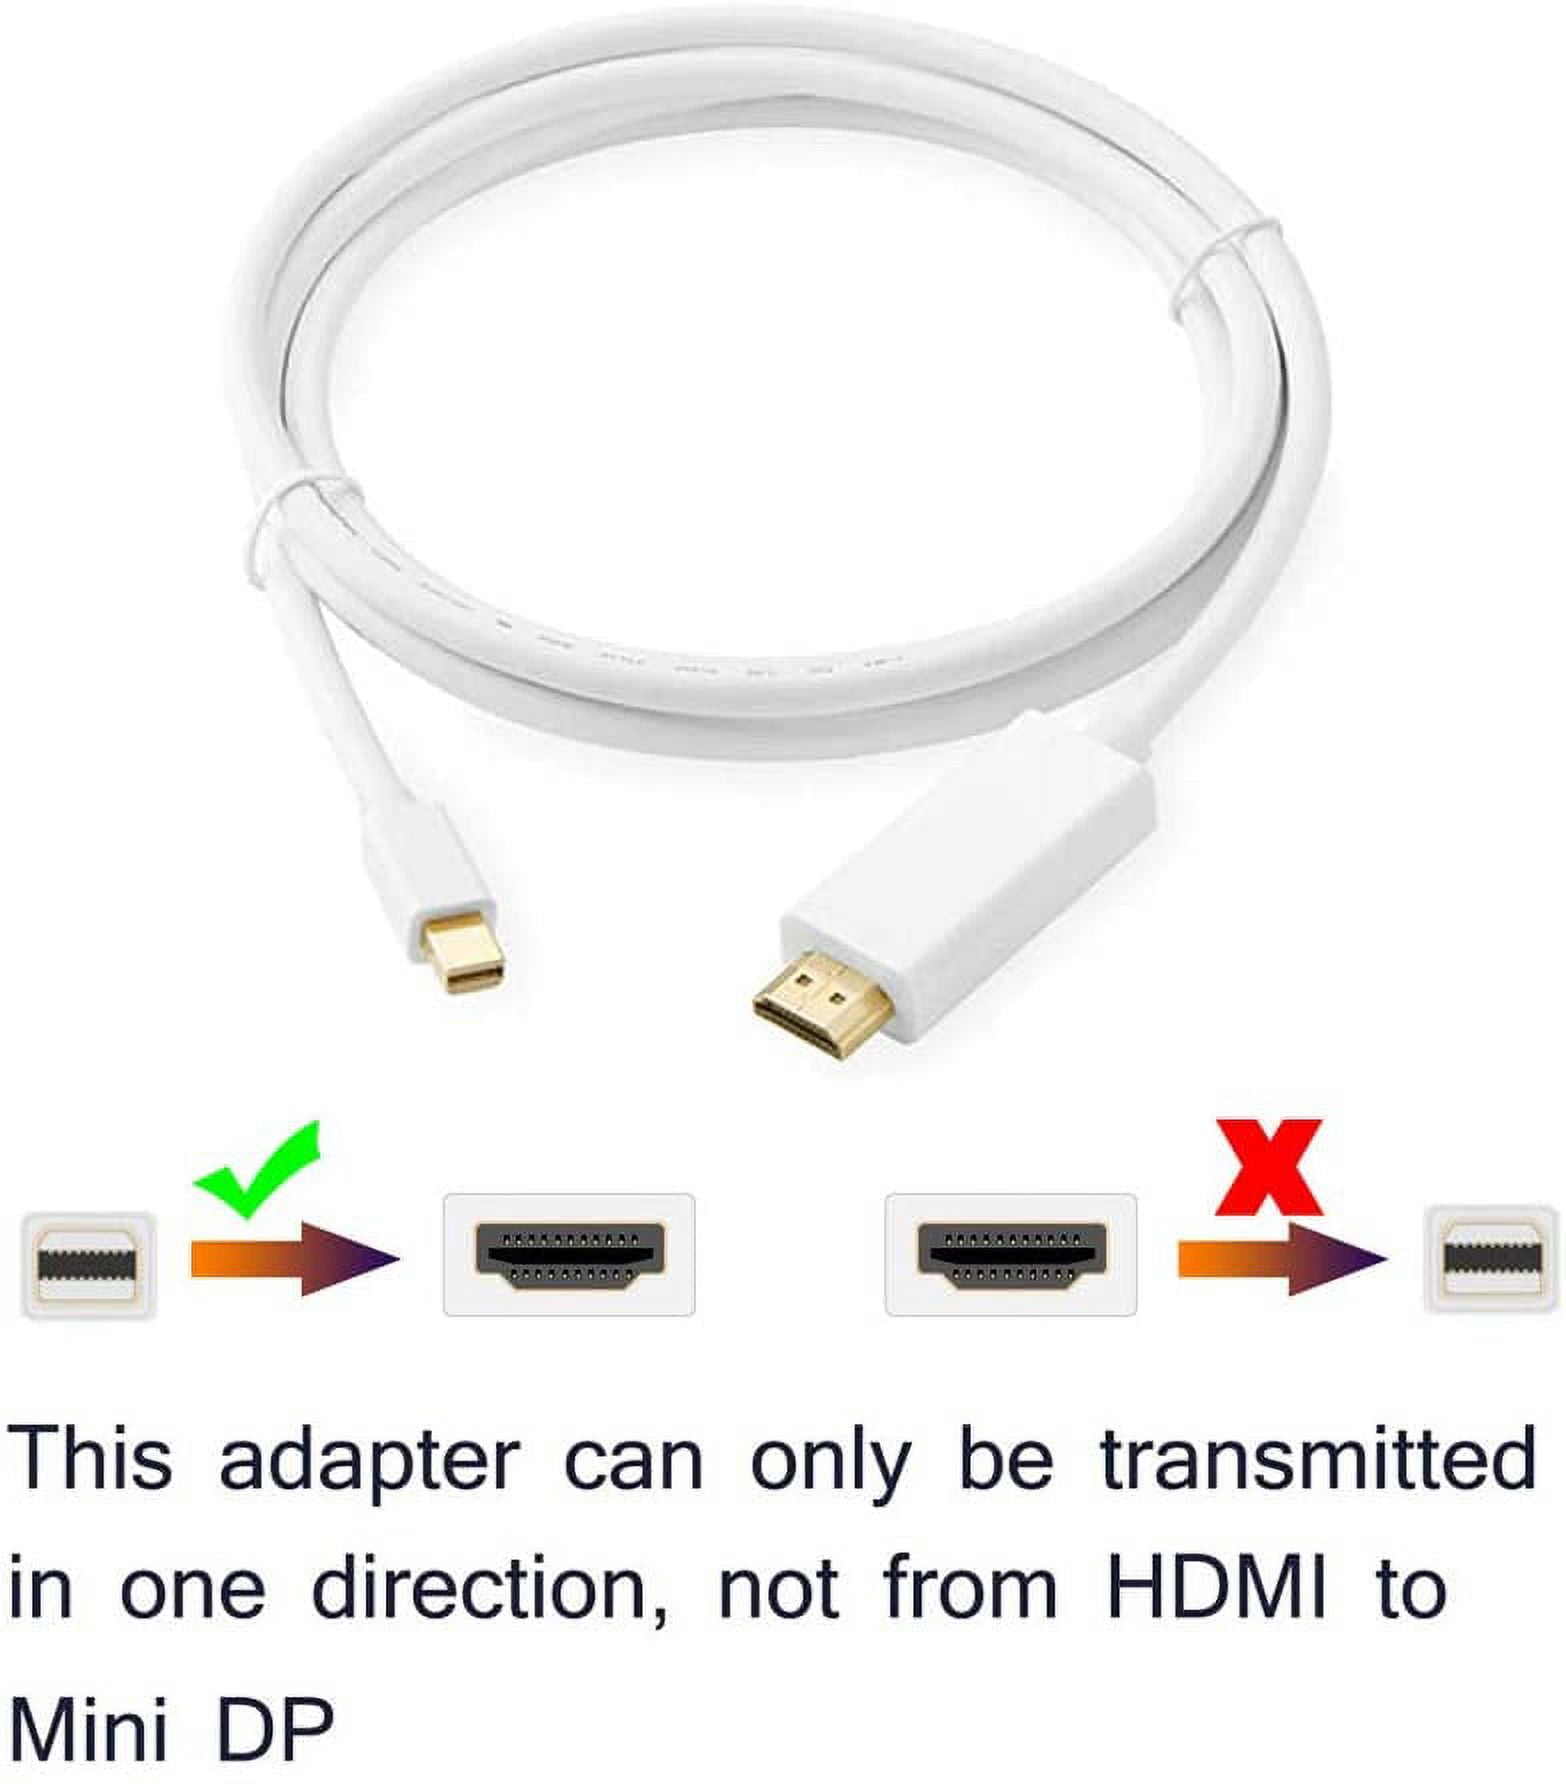 Jihaan Thunderbolt Cable 0.2 m Thunderbolt to HDMI Cable Compatible with  Unibody Apple MacBook, MacBook Pro iMac MacBook, Air Mac Mini Laptop -  Jihaan 